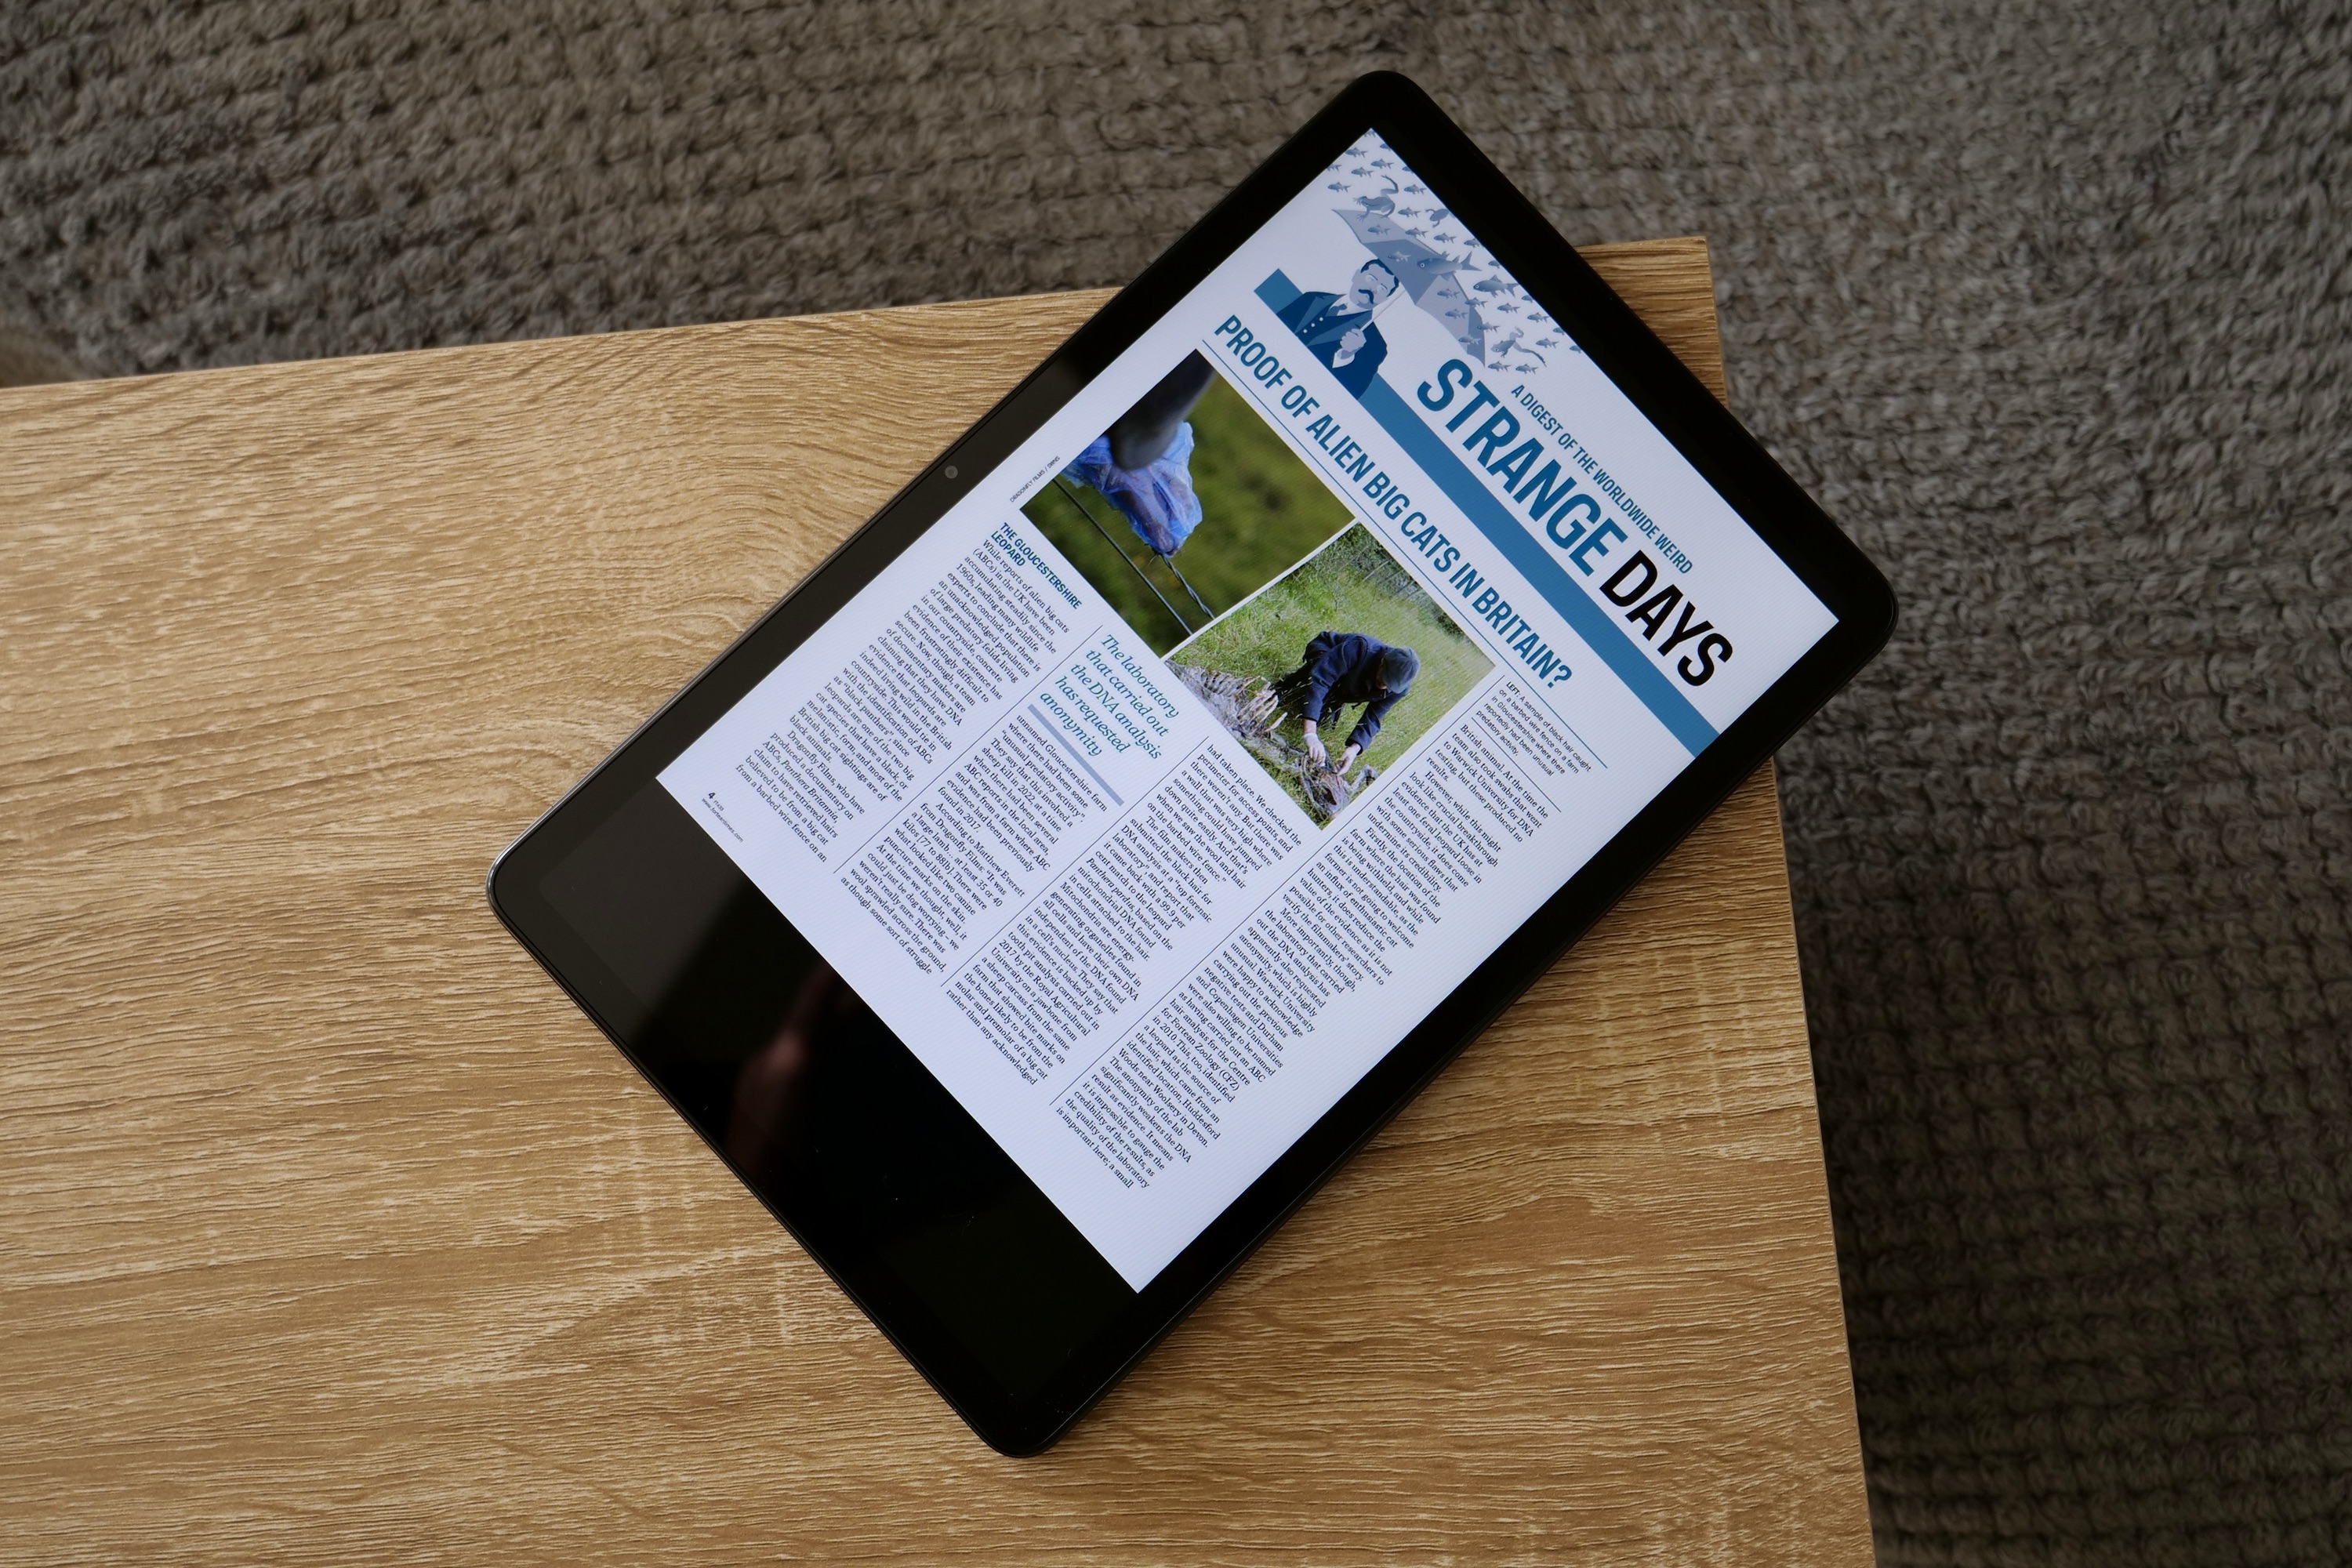 The Amazon Kindle Fire Max 11 showing a magazine on screen.